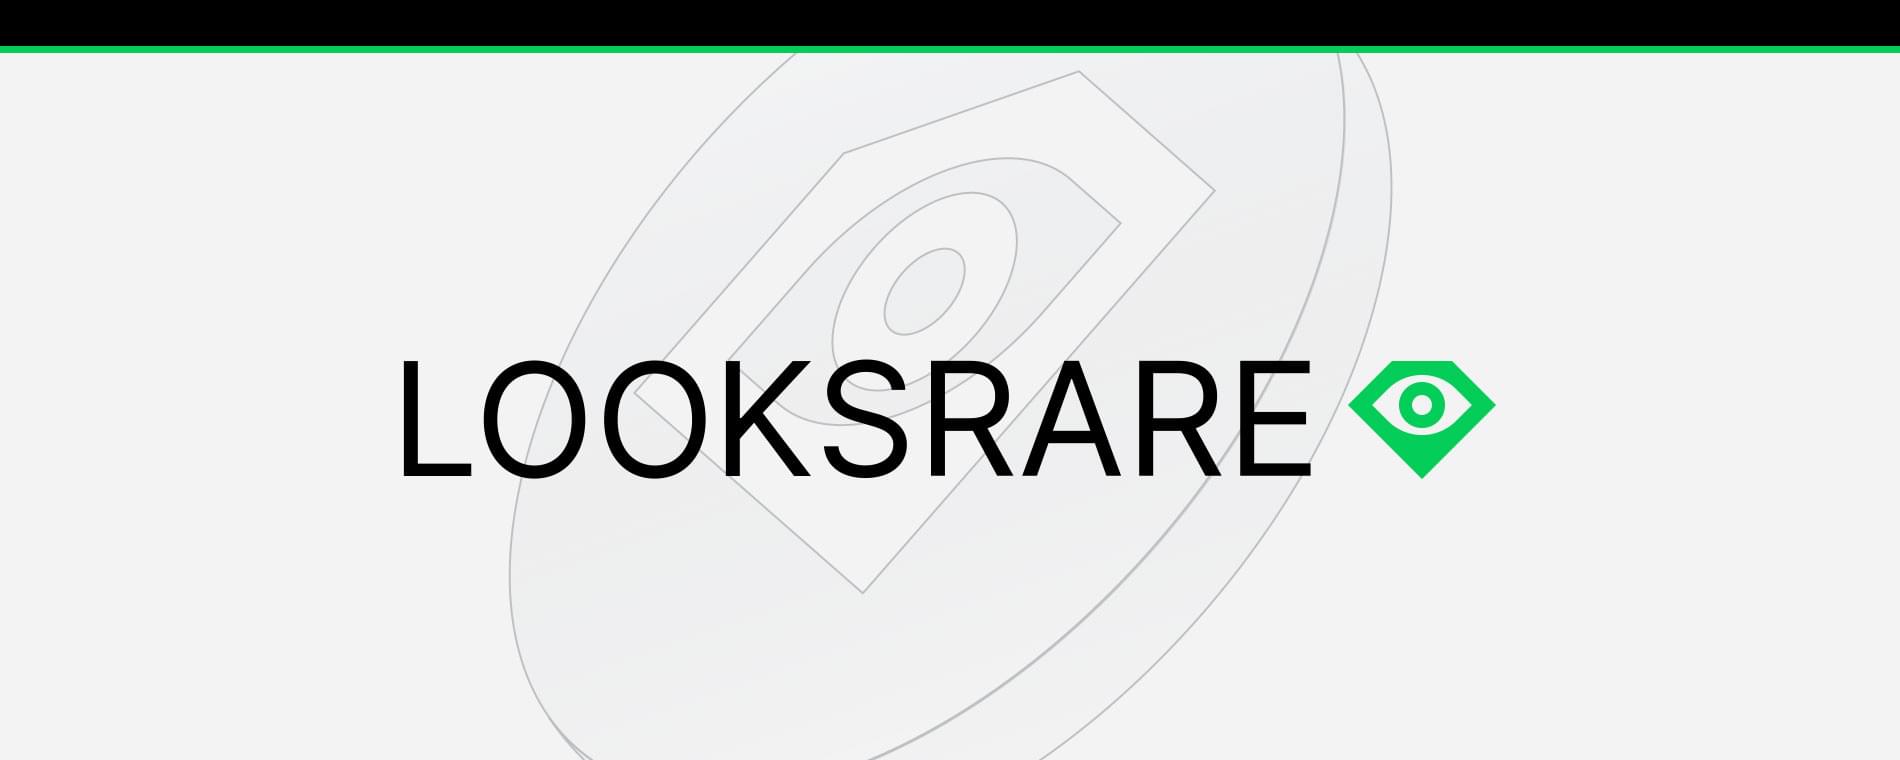 How to use LooksRare, the Ethereum NFT tool